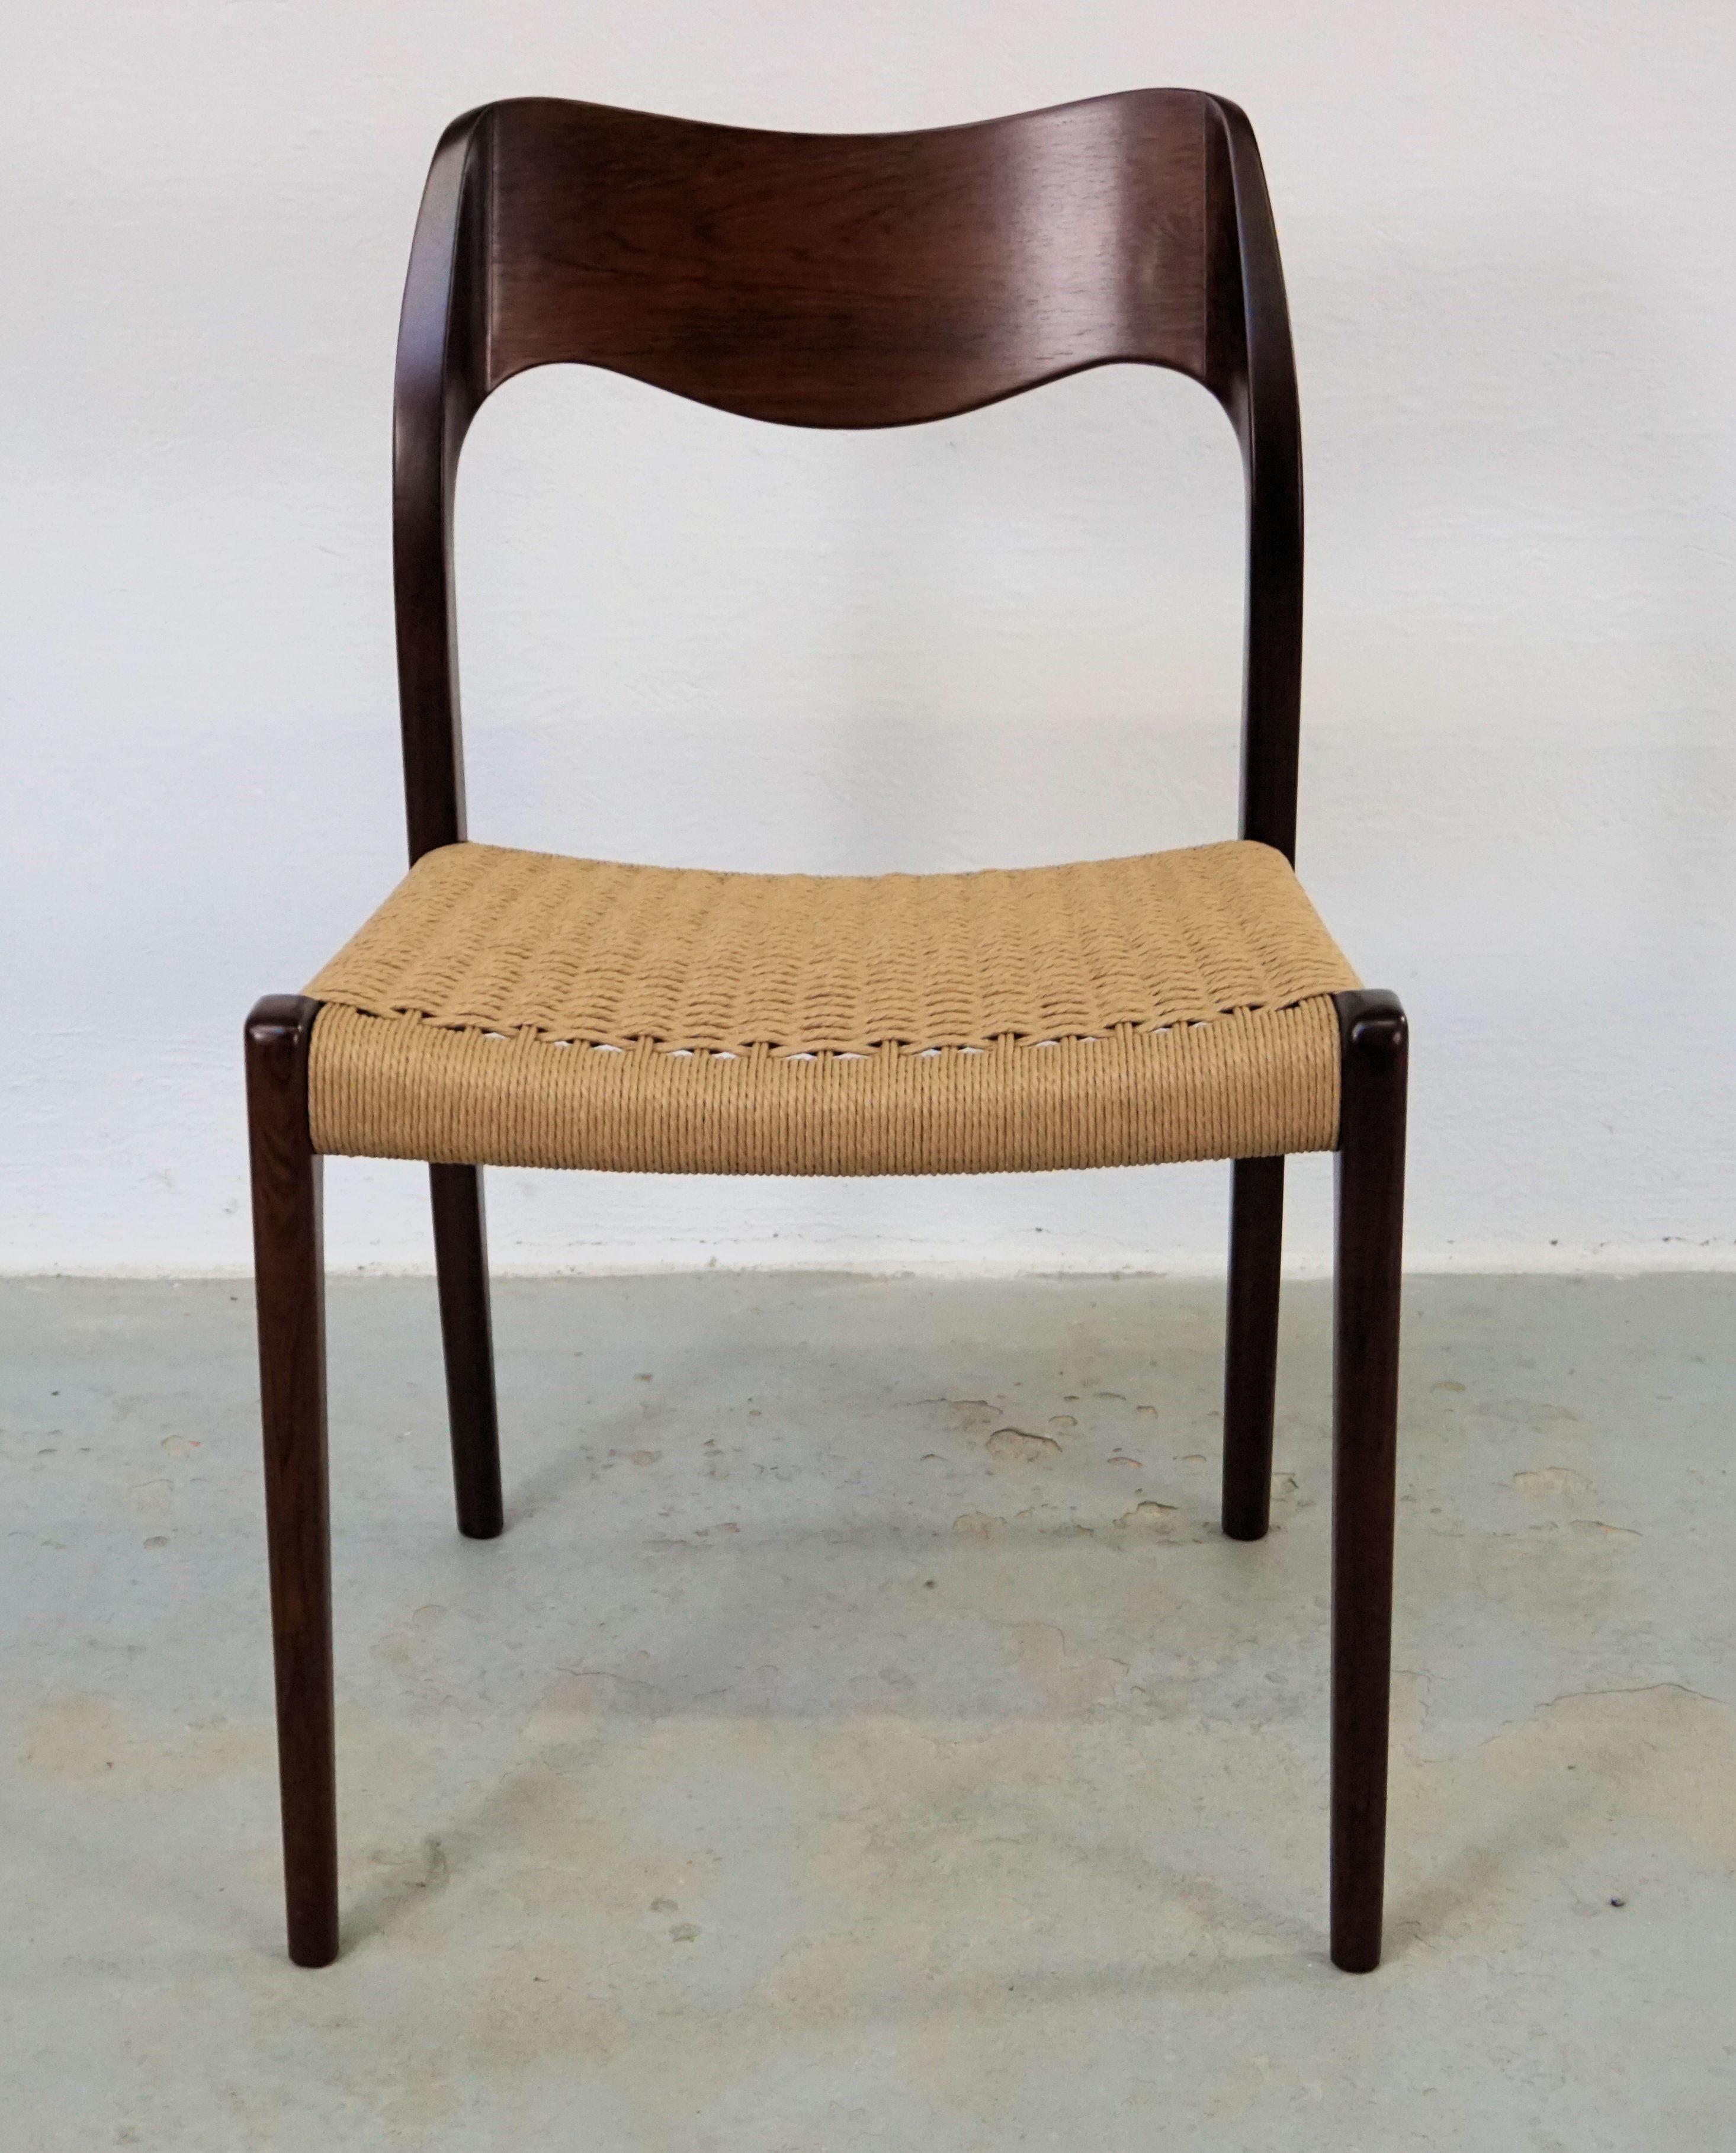 1960s Niels Otto Møller twelve rosewood dining chairs with new paper cord seats designed by Niels Otto Møller in 1951.

The chairs feature a solid frame and veneered backrest in rosewood designed with straight lined legs and an elegant organic